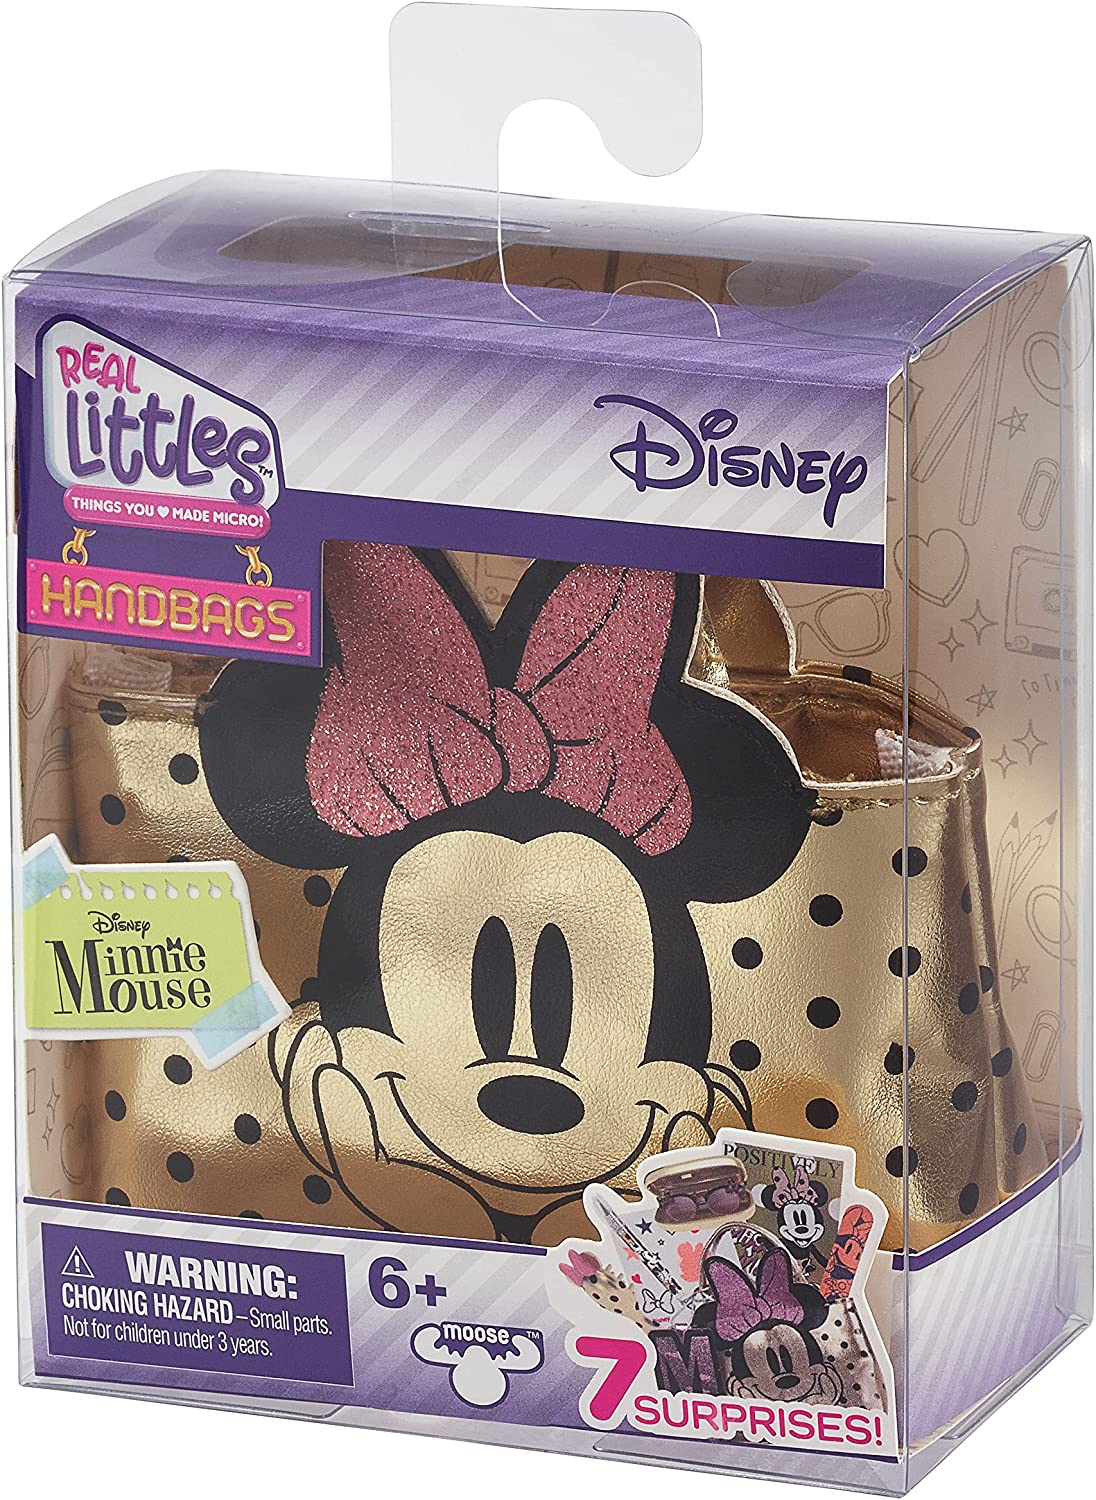 REAL LITTLES Disney - Minnie Mouse Locker and Exclusive Backpack.